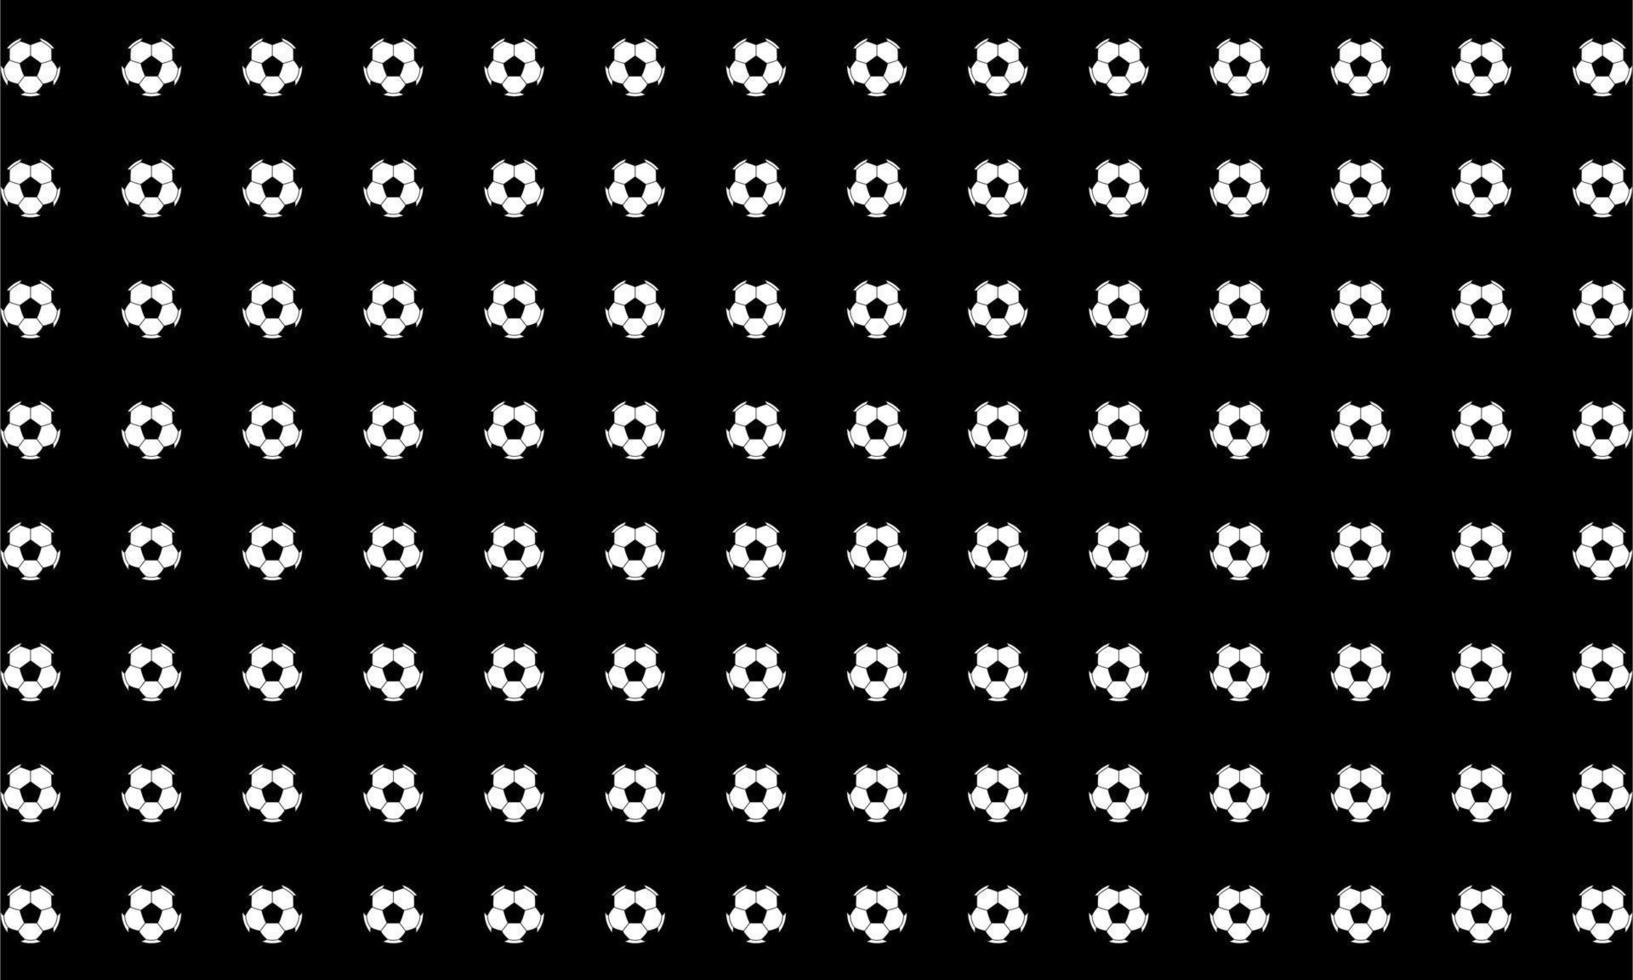 Seamless Motif Pattern Composed by Foot Ball or Soccer Ball Composition for Background, Pattern, Decoration, Ornate, Website or Graphic Design Element. Vector Illustration